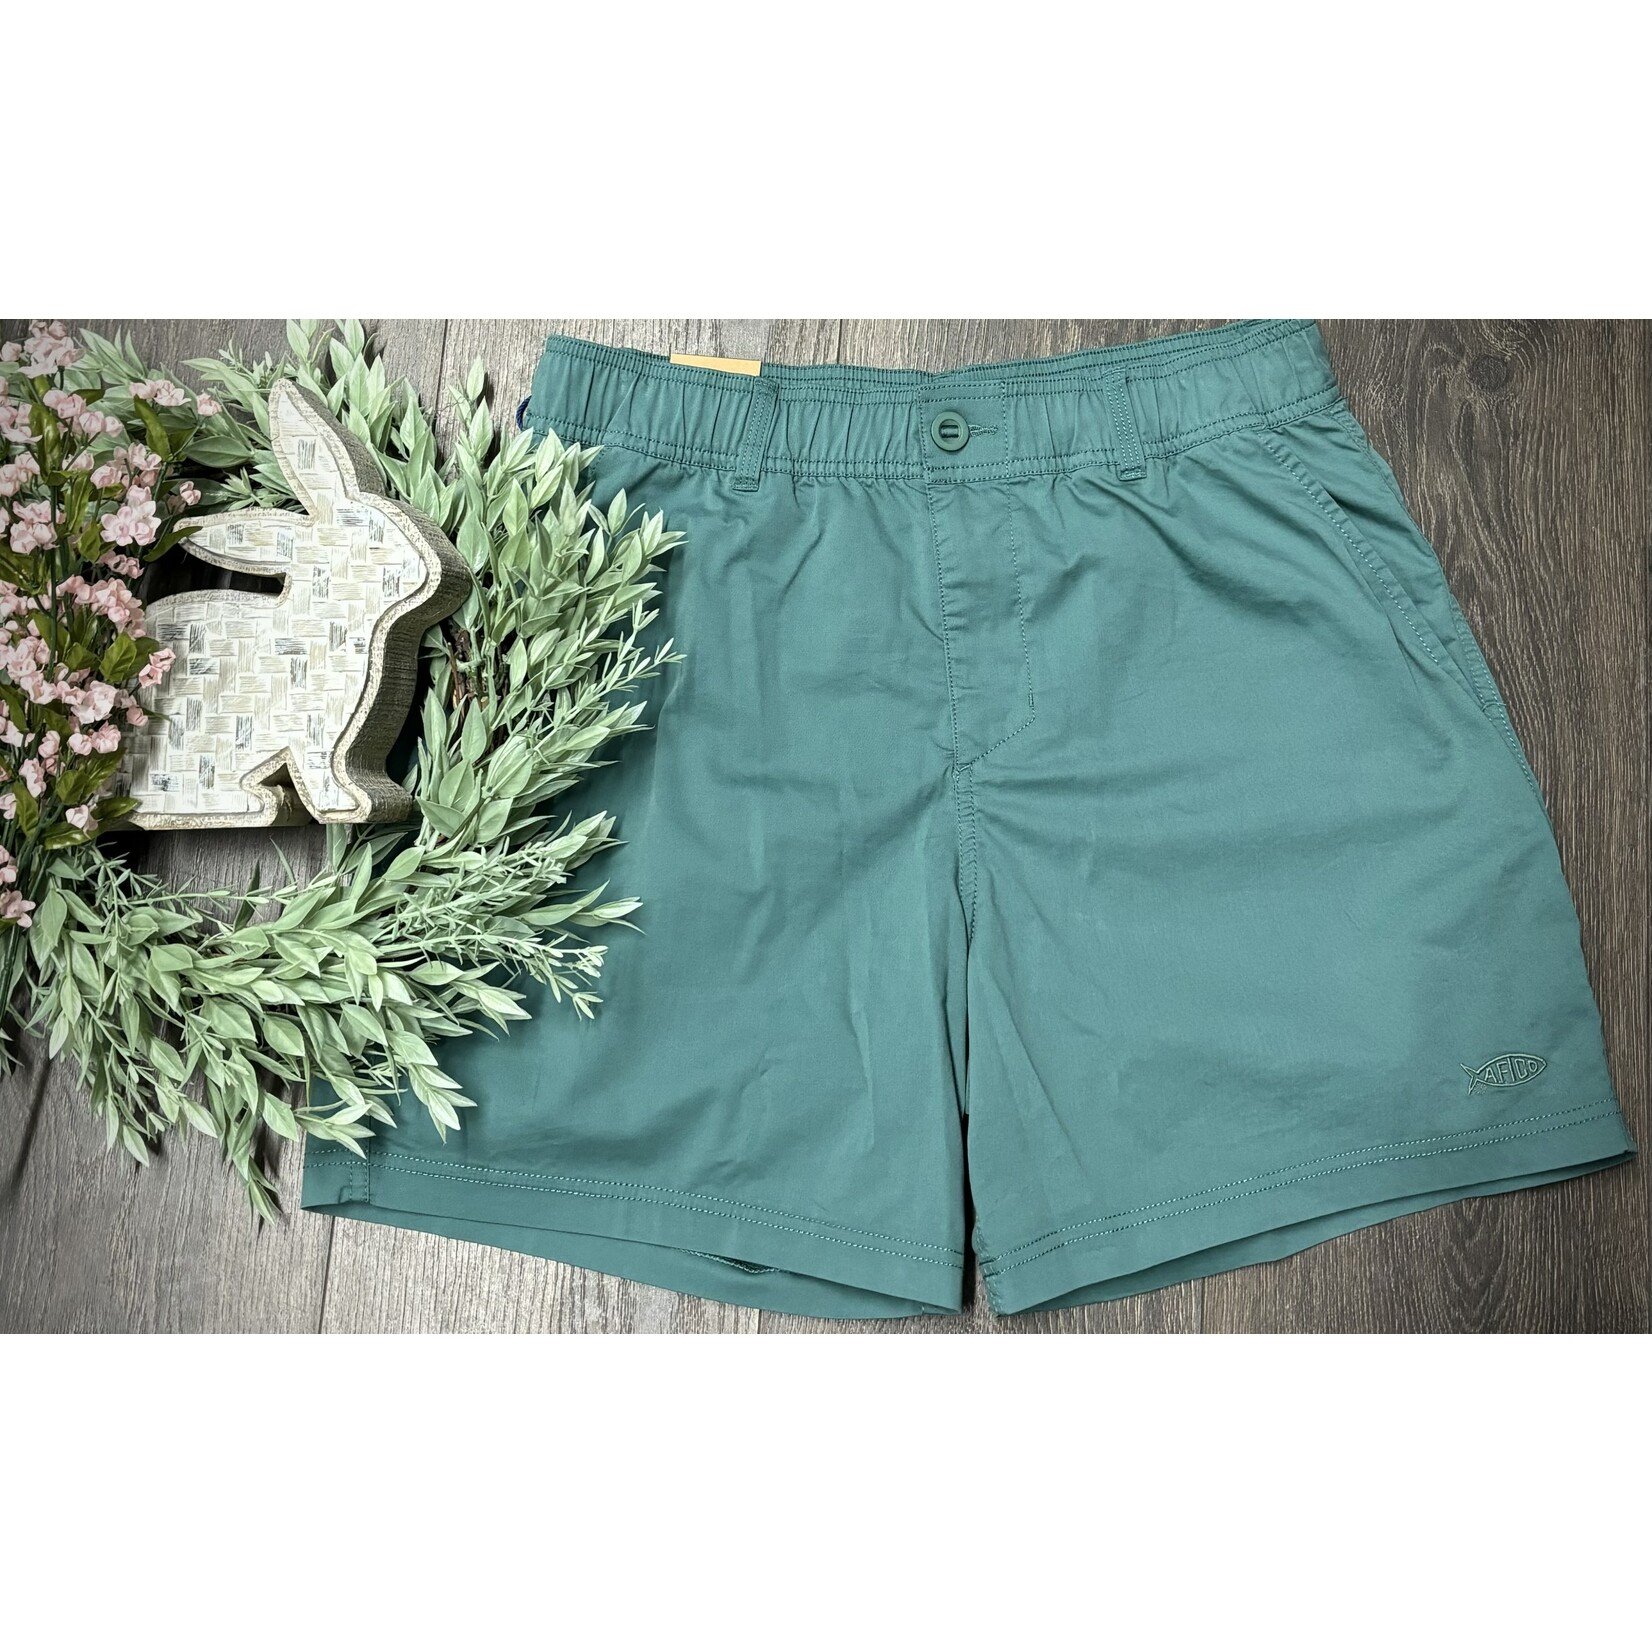 Aftco Men's Landlocked Shorts - EZN Outfitters